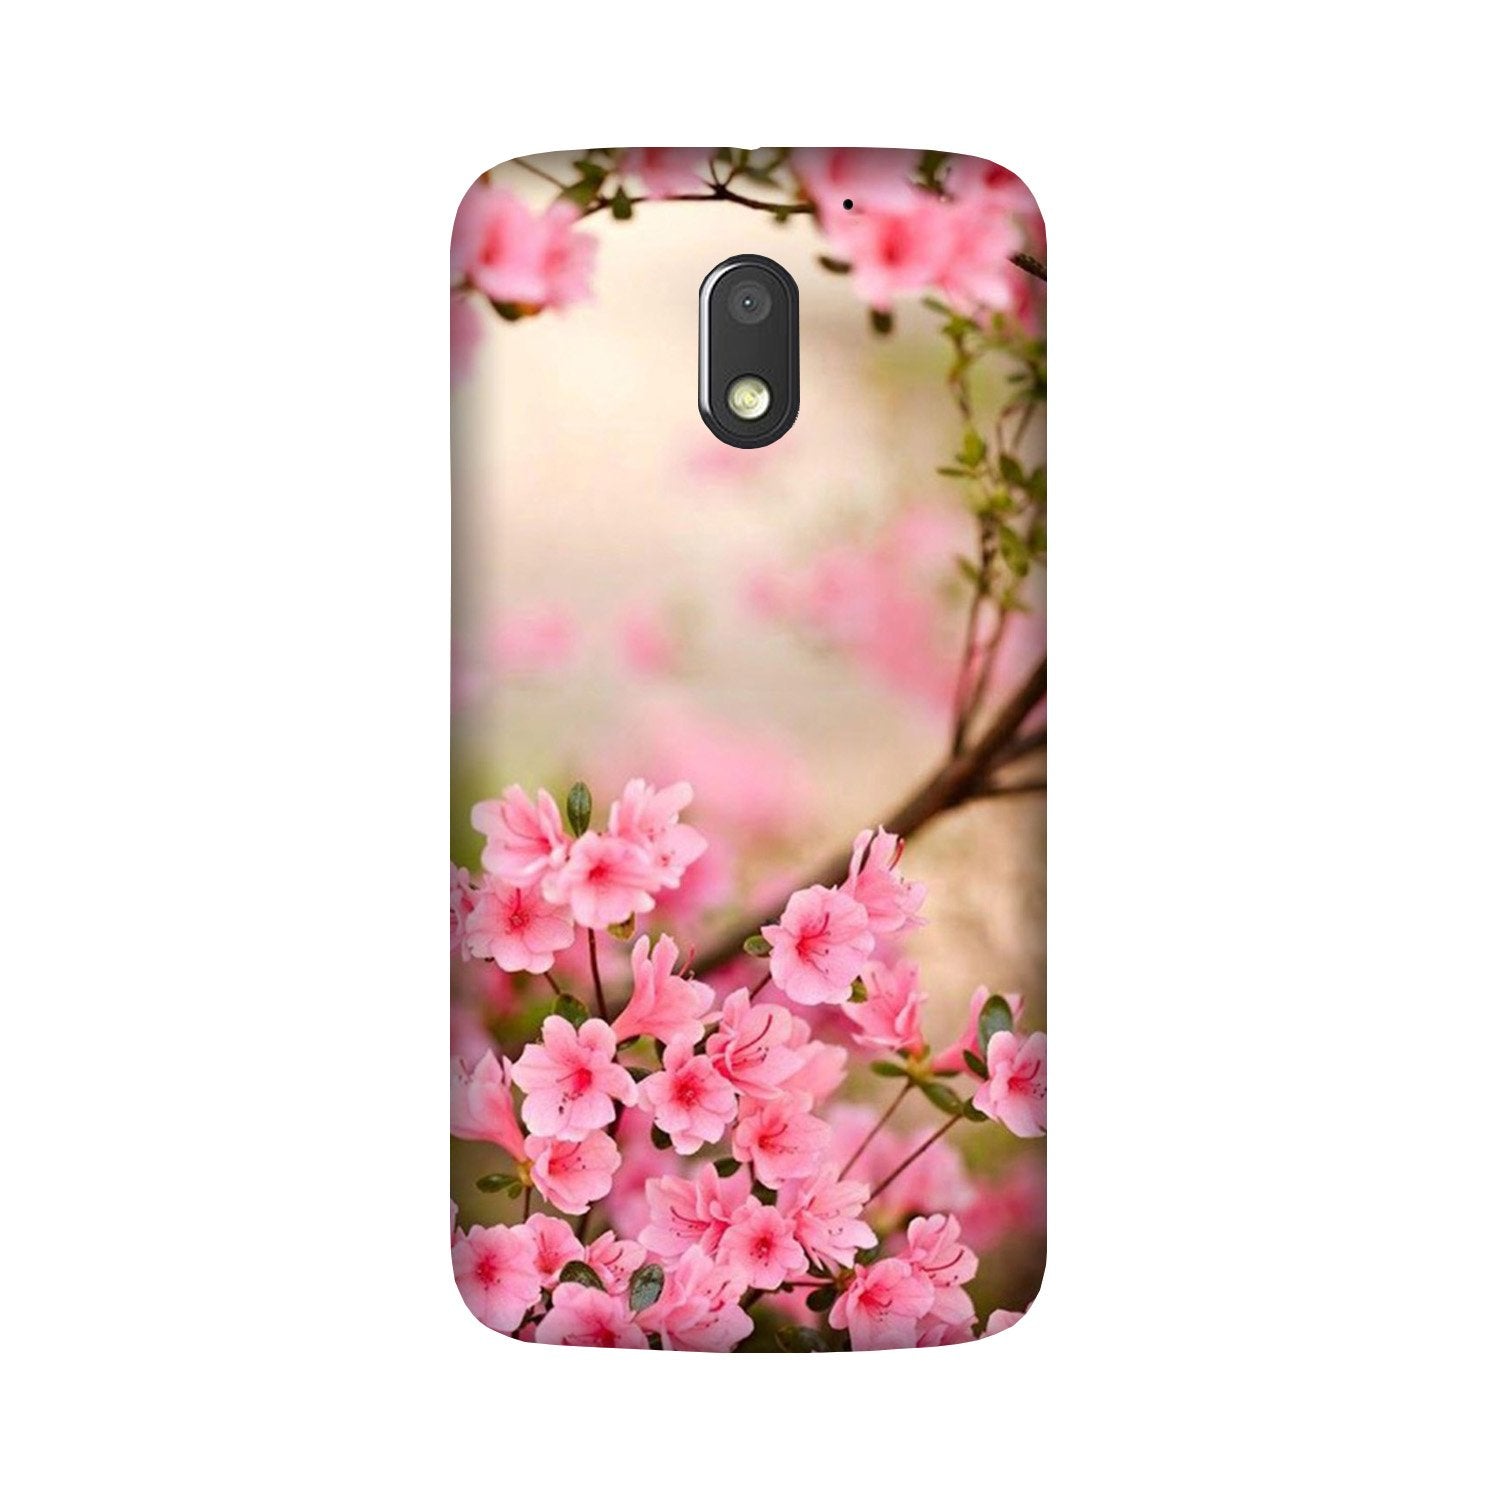 Pink flowers Case for Moto G4 Play